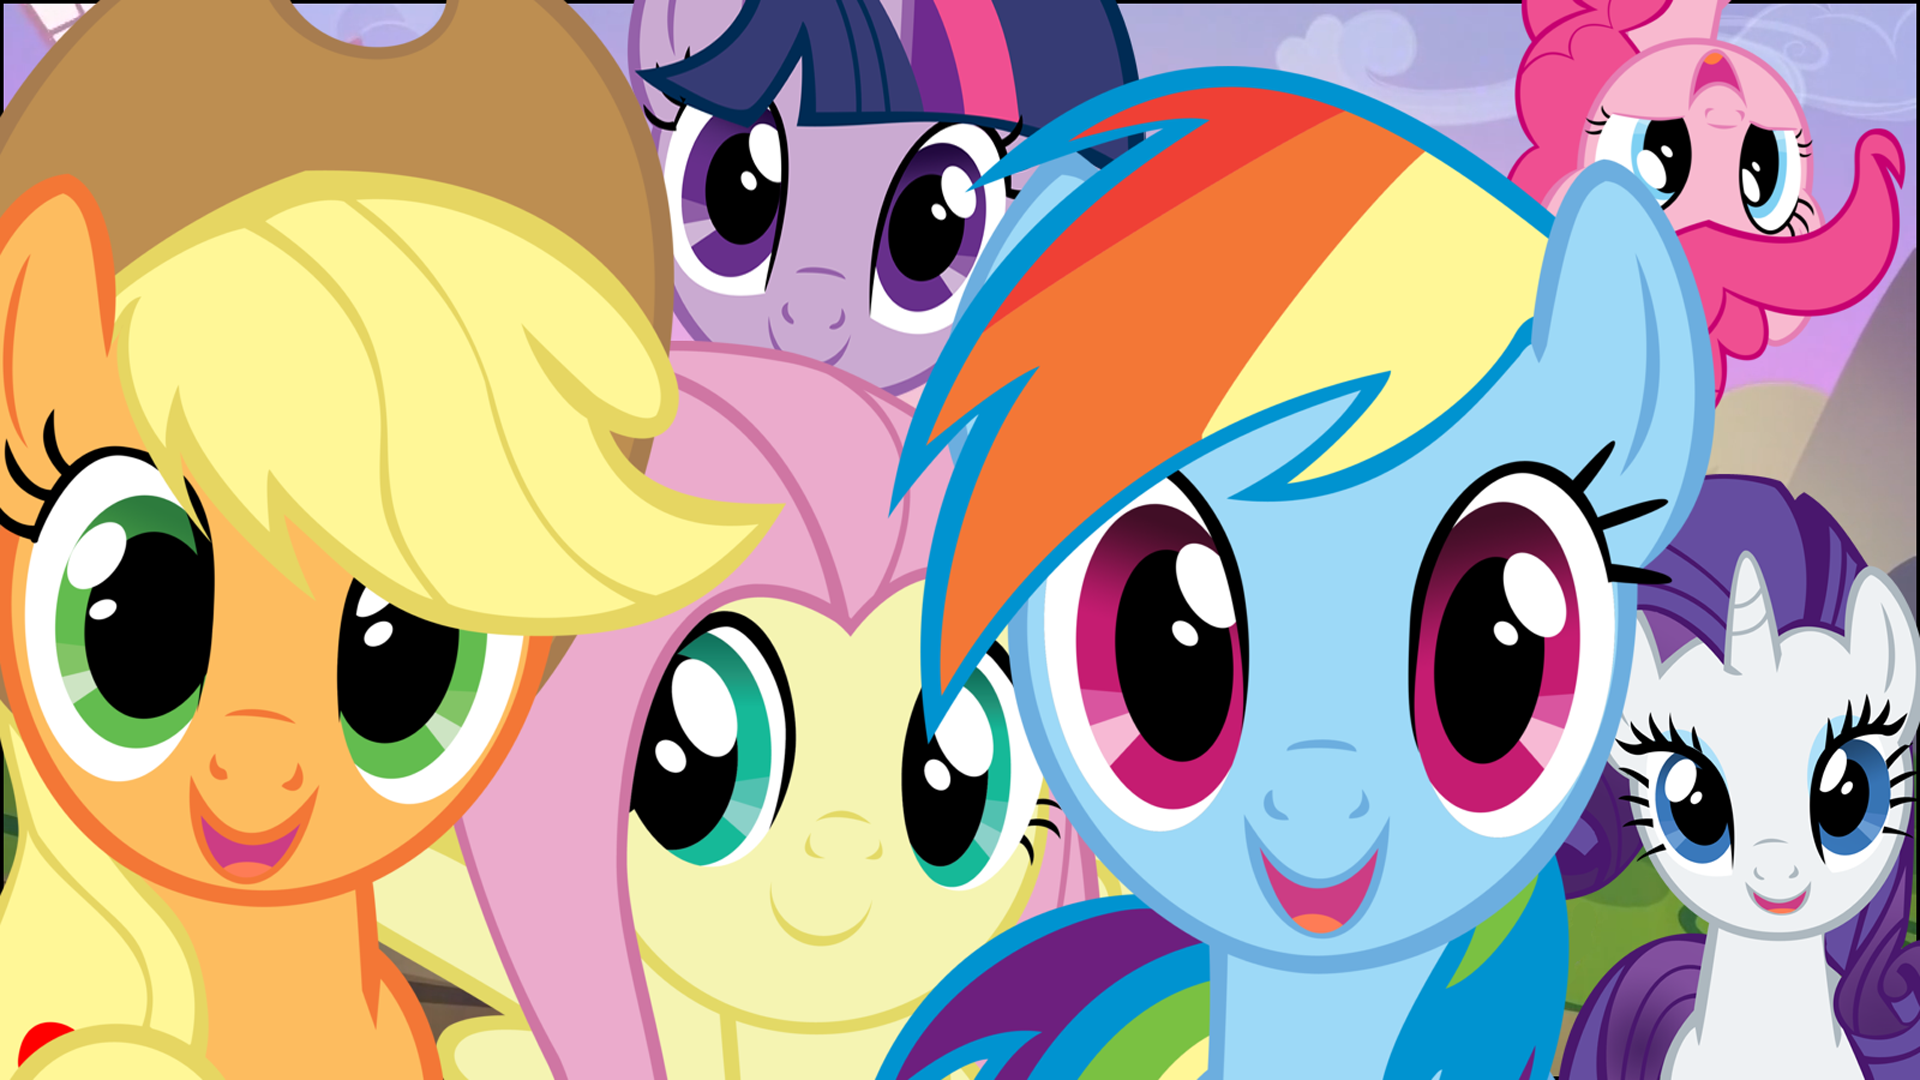 MLP - Wallpaper Mane6 by kitsuneymg, Mackaged, Mihaaaa and starboltpony